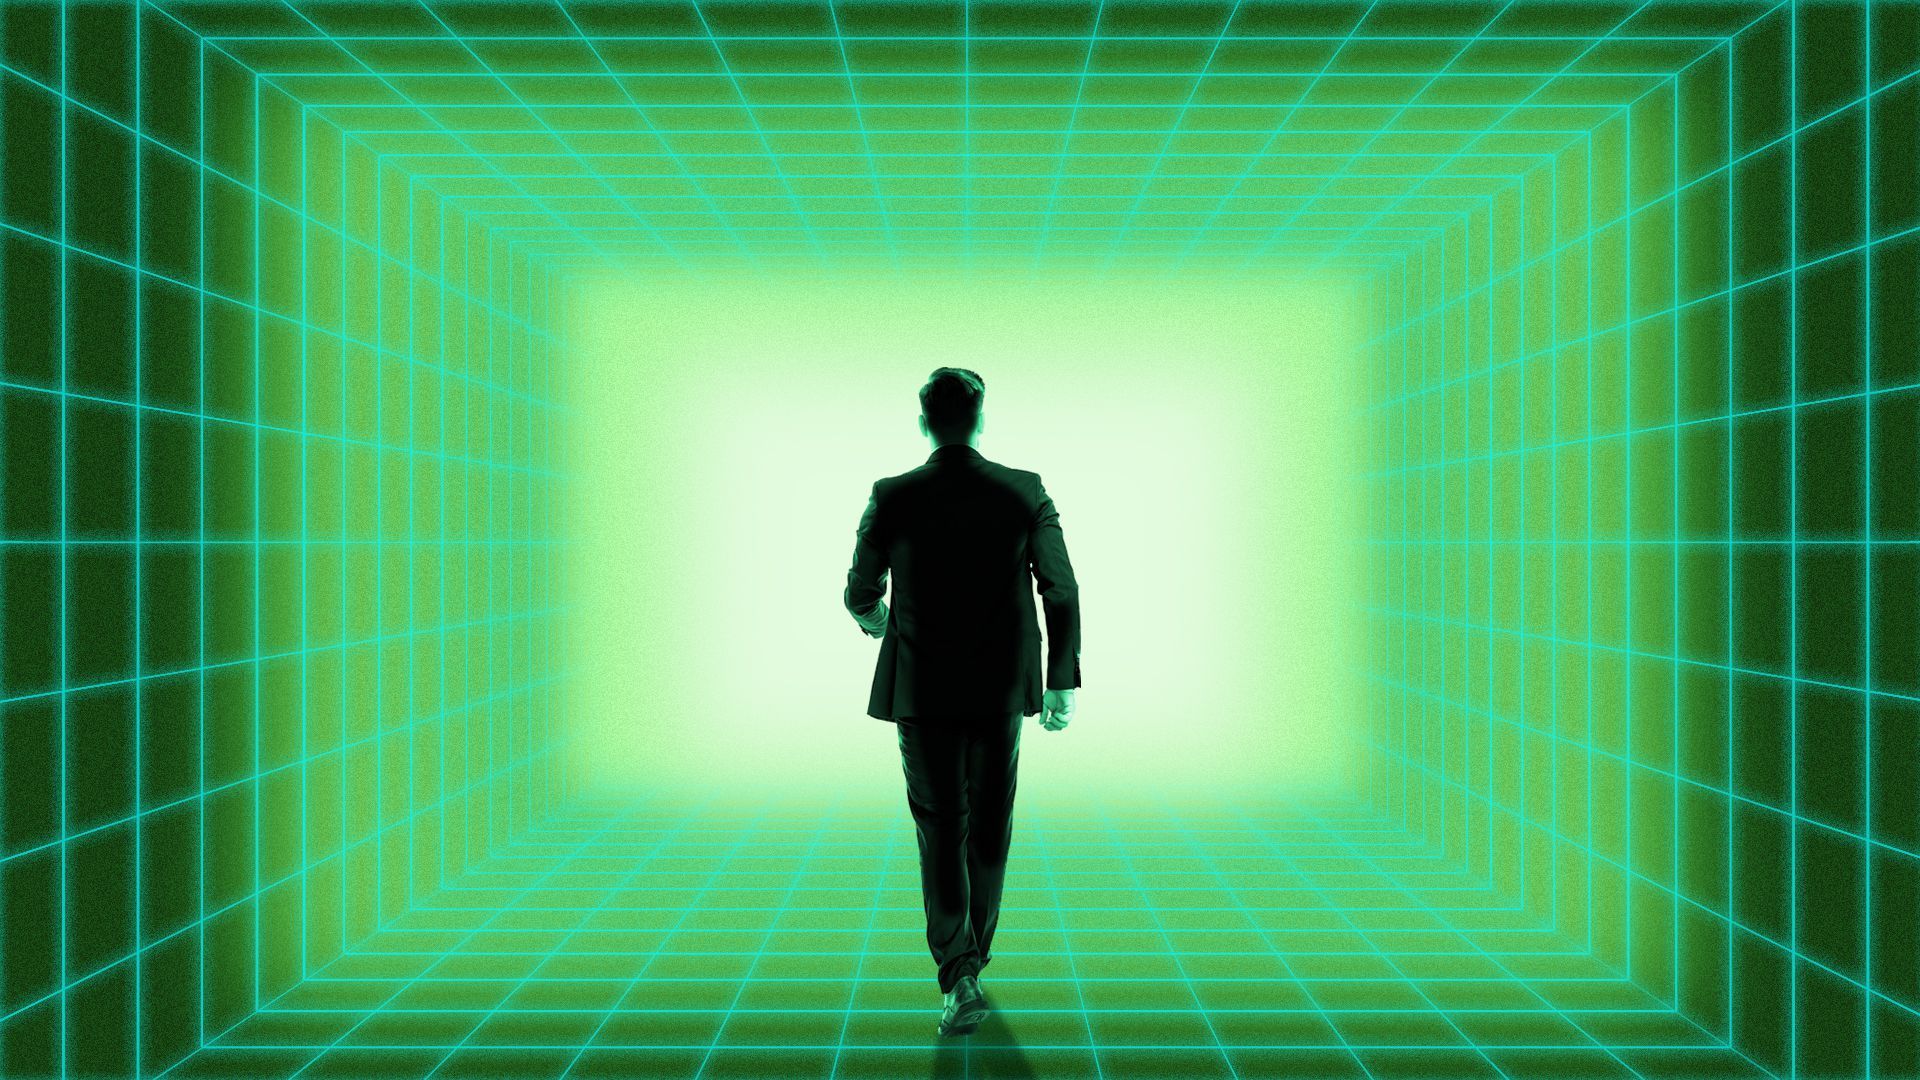 Illustration of a person walking along a gridded hallway towards a bright light